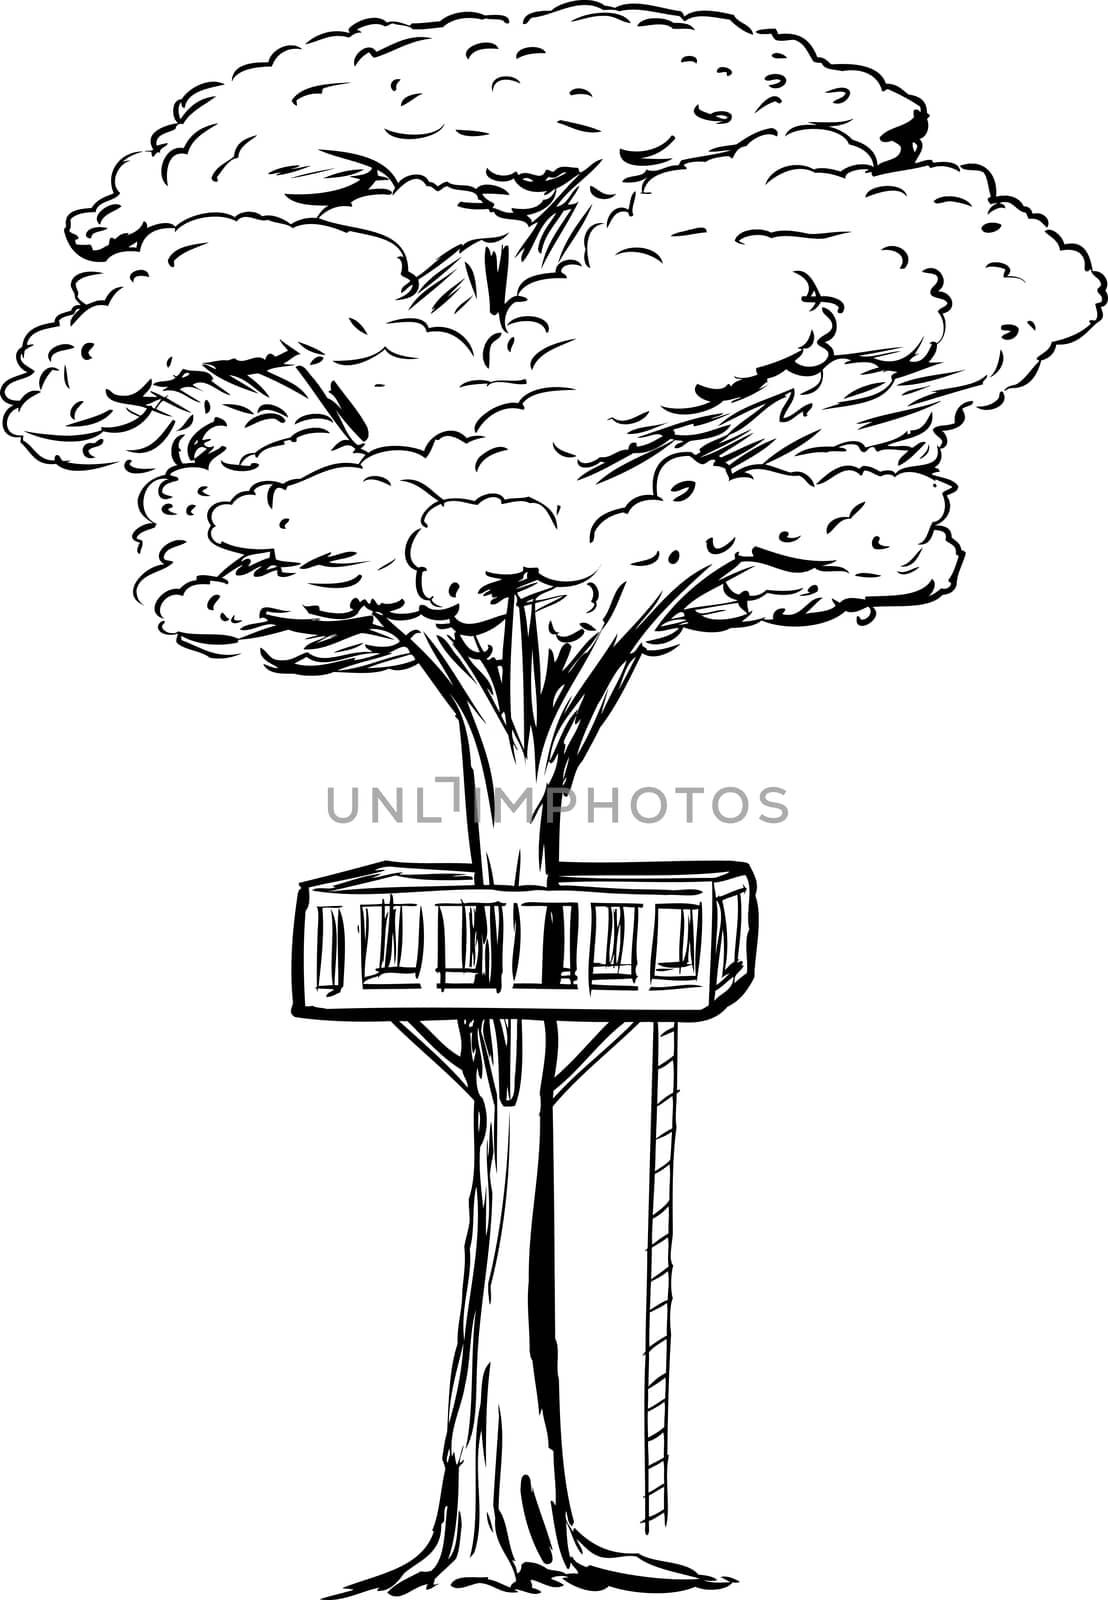 Outlined Treehouse Deck in Tree by TheBlackRhino